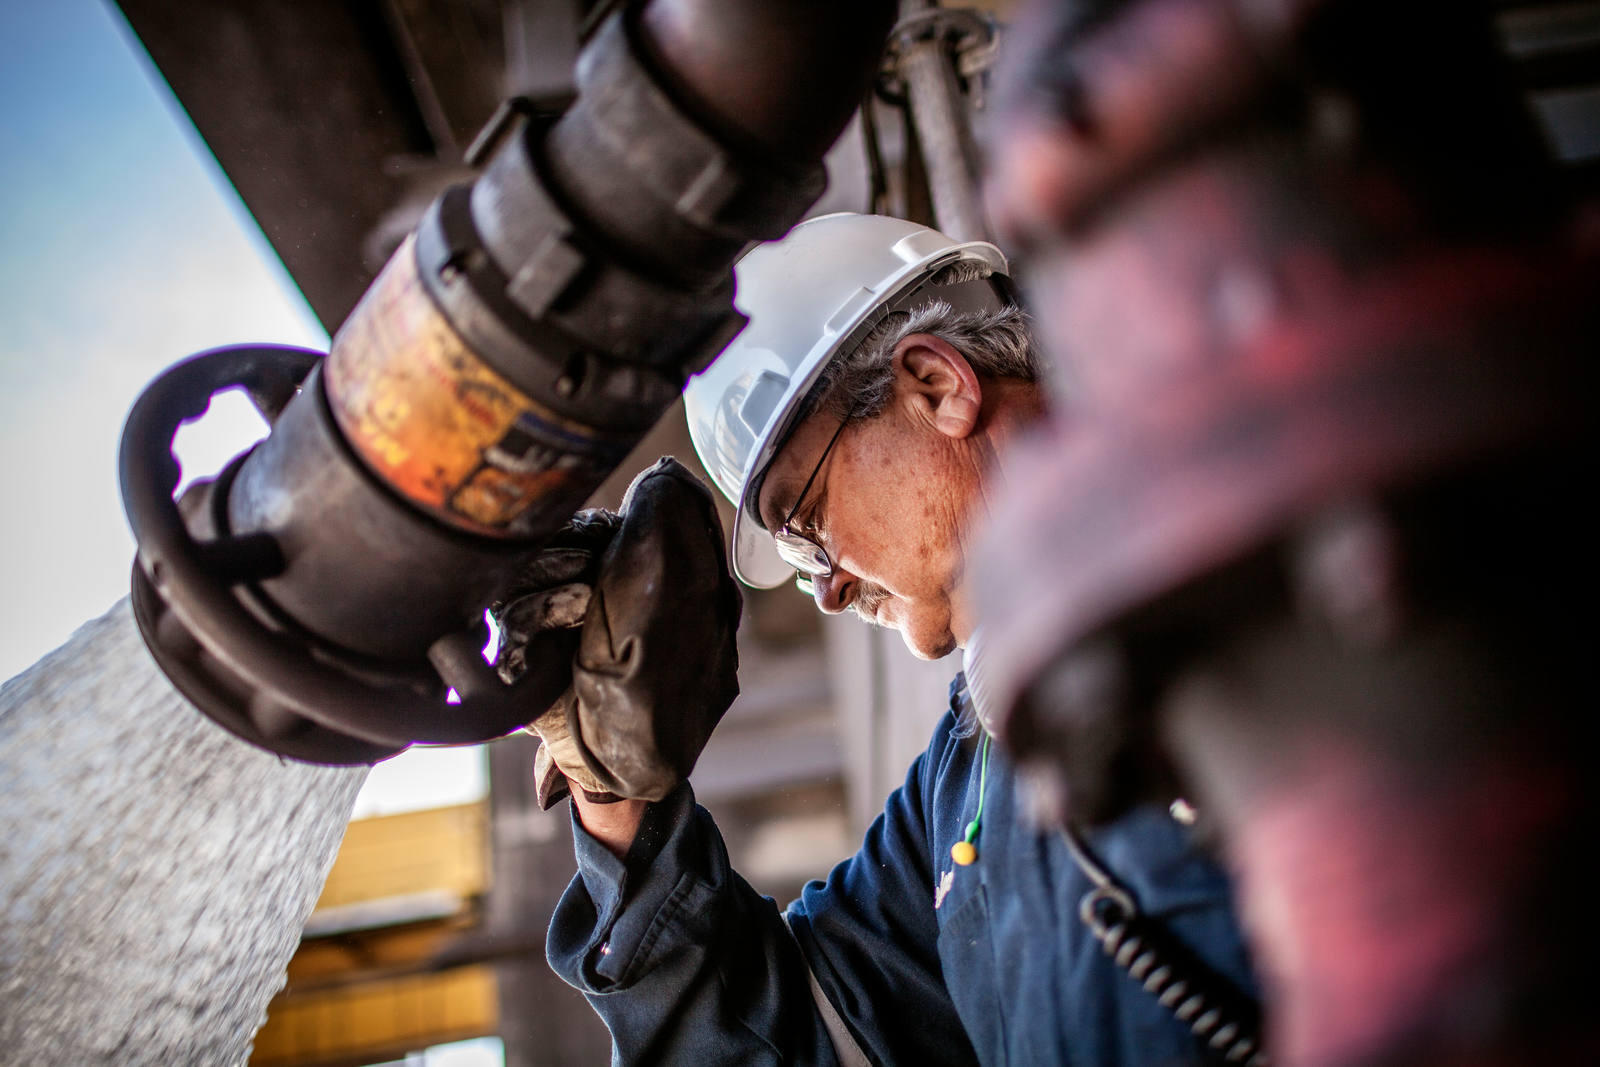 Employee working at the Port Arthur refinery in the USA